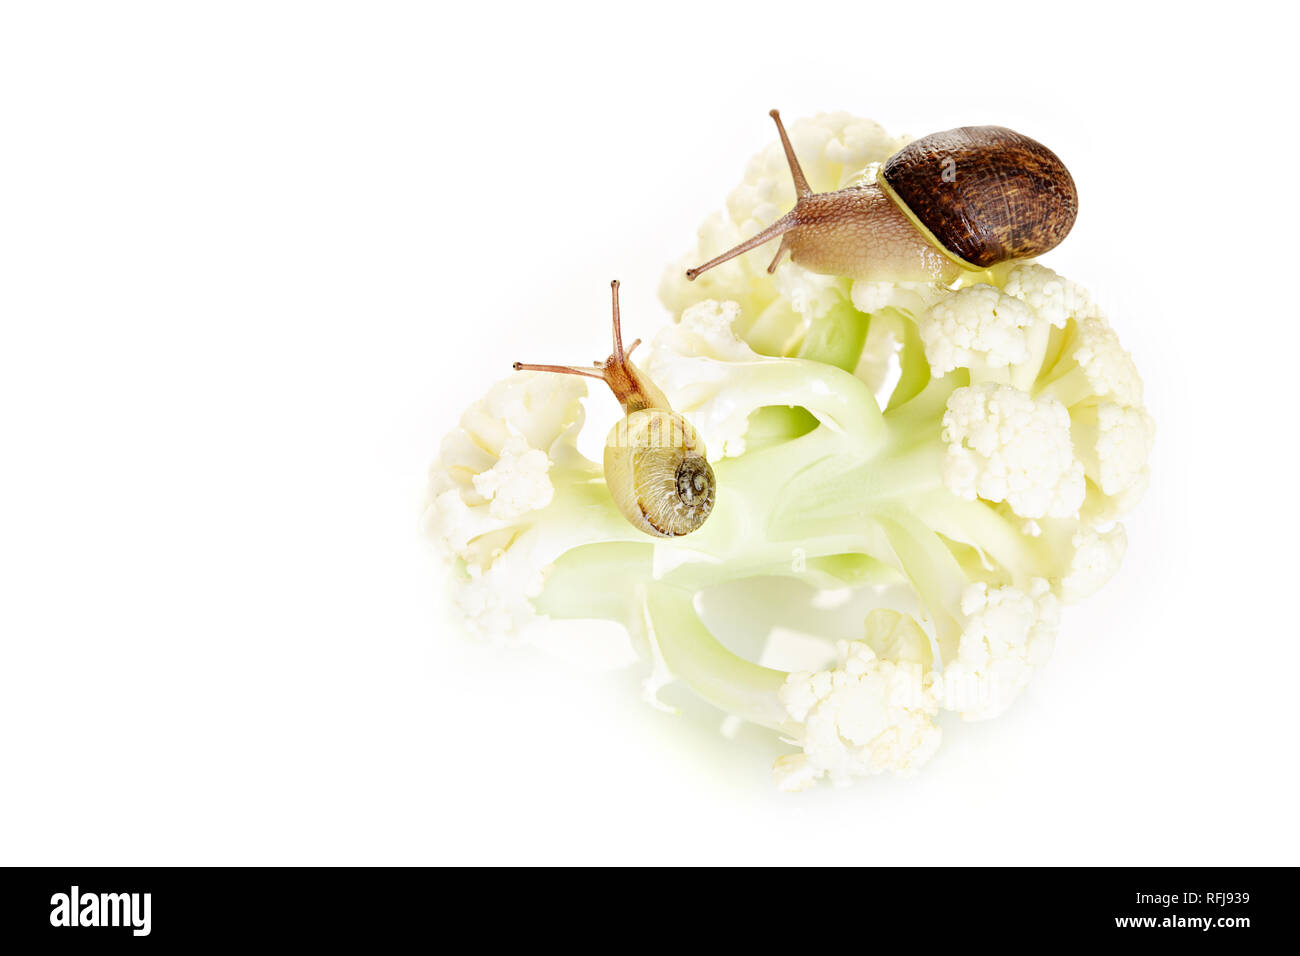 Two garden snails at a walk on cauliflower. Snail plage concept Stock Photo